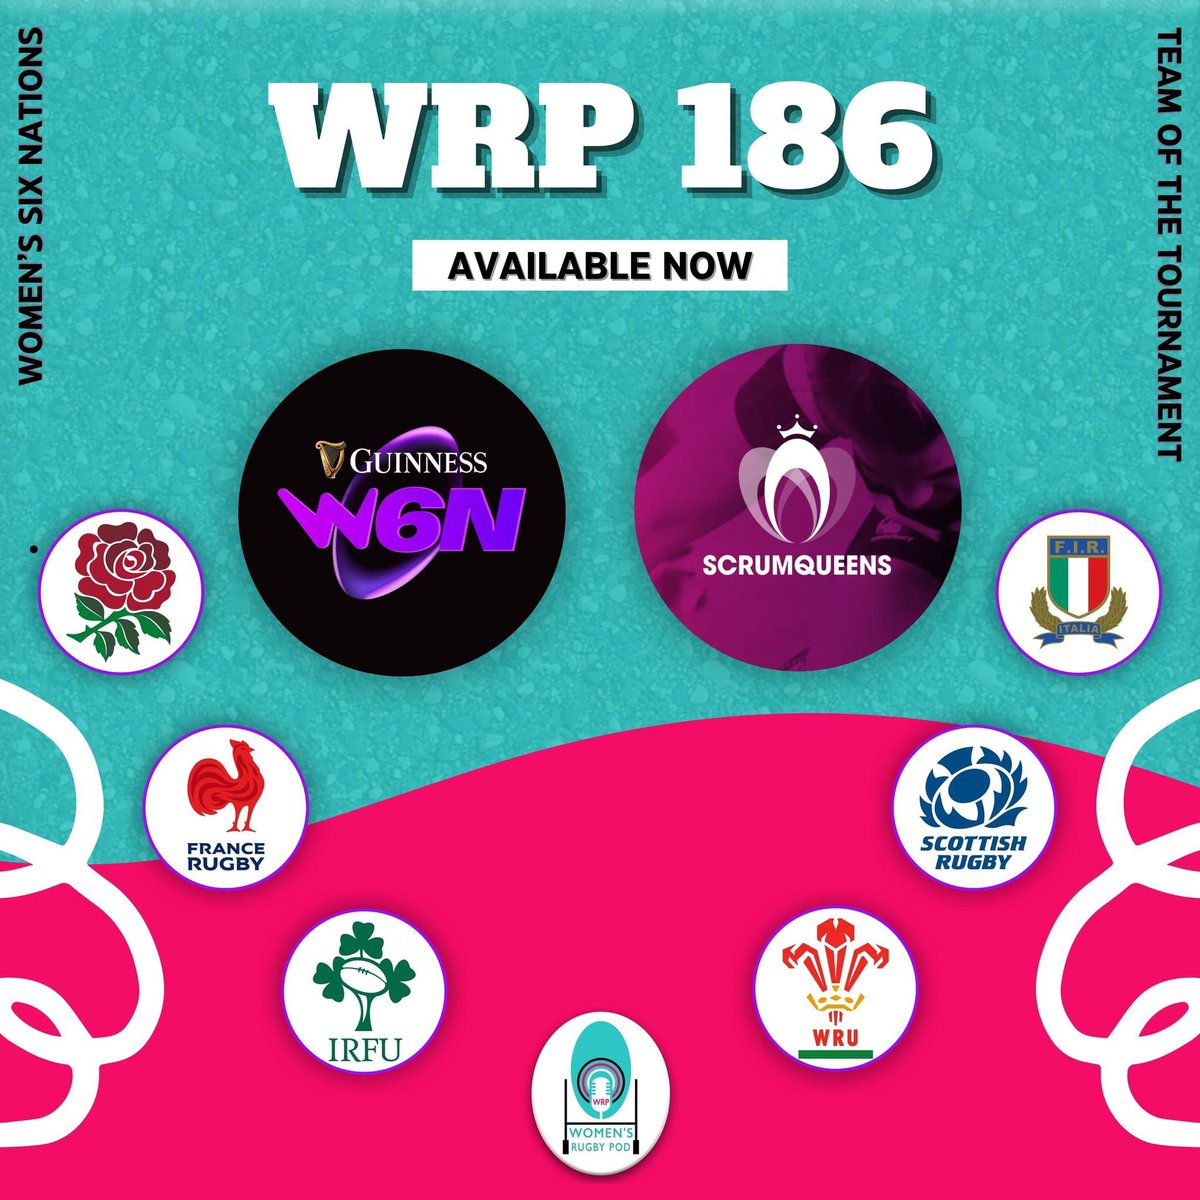 𝐖𝐑𝐏 𝟏𝟖𝟔 Join us this week as we are joined by @Sara_Orchard and @AliDonnelly of @ScrumQueens to discuss the final round of the @Womens6Nations 🏆 Six Nations 🏉 Team of the Tournament 📰 Global Rugby News 🌍 Global Game 🎧 linktr.ee/WomensRugbyPod #WRP #WomensRugby #PWR